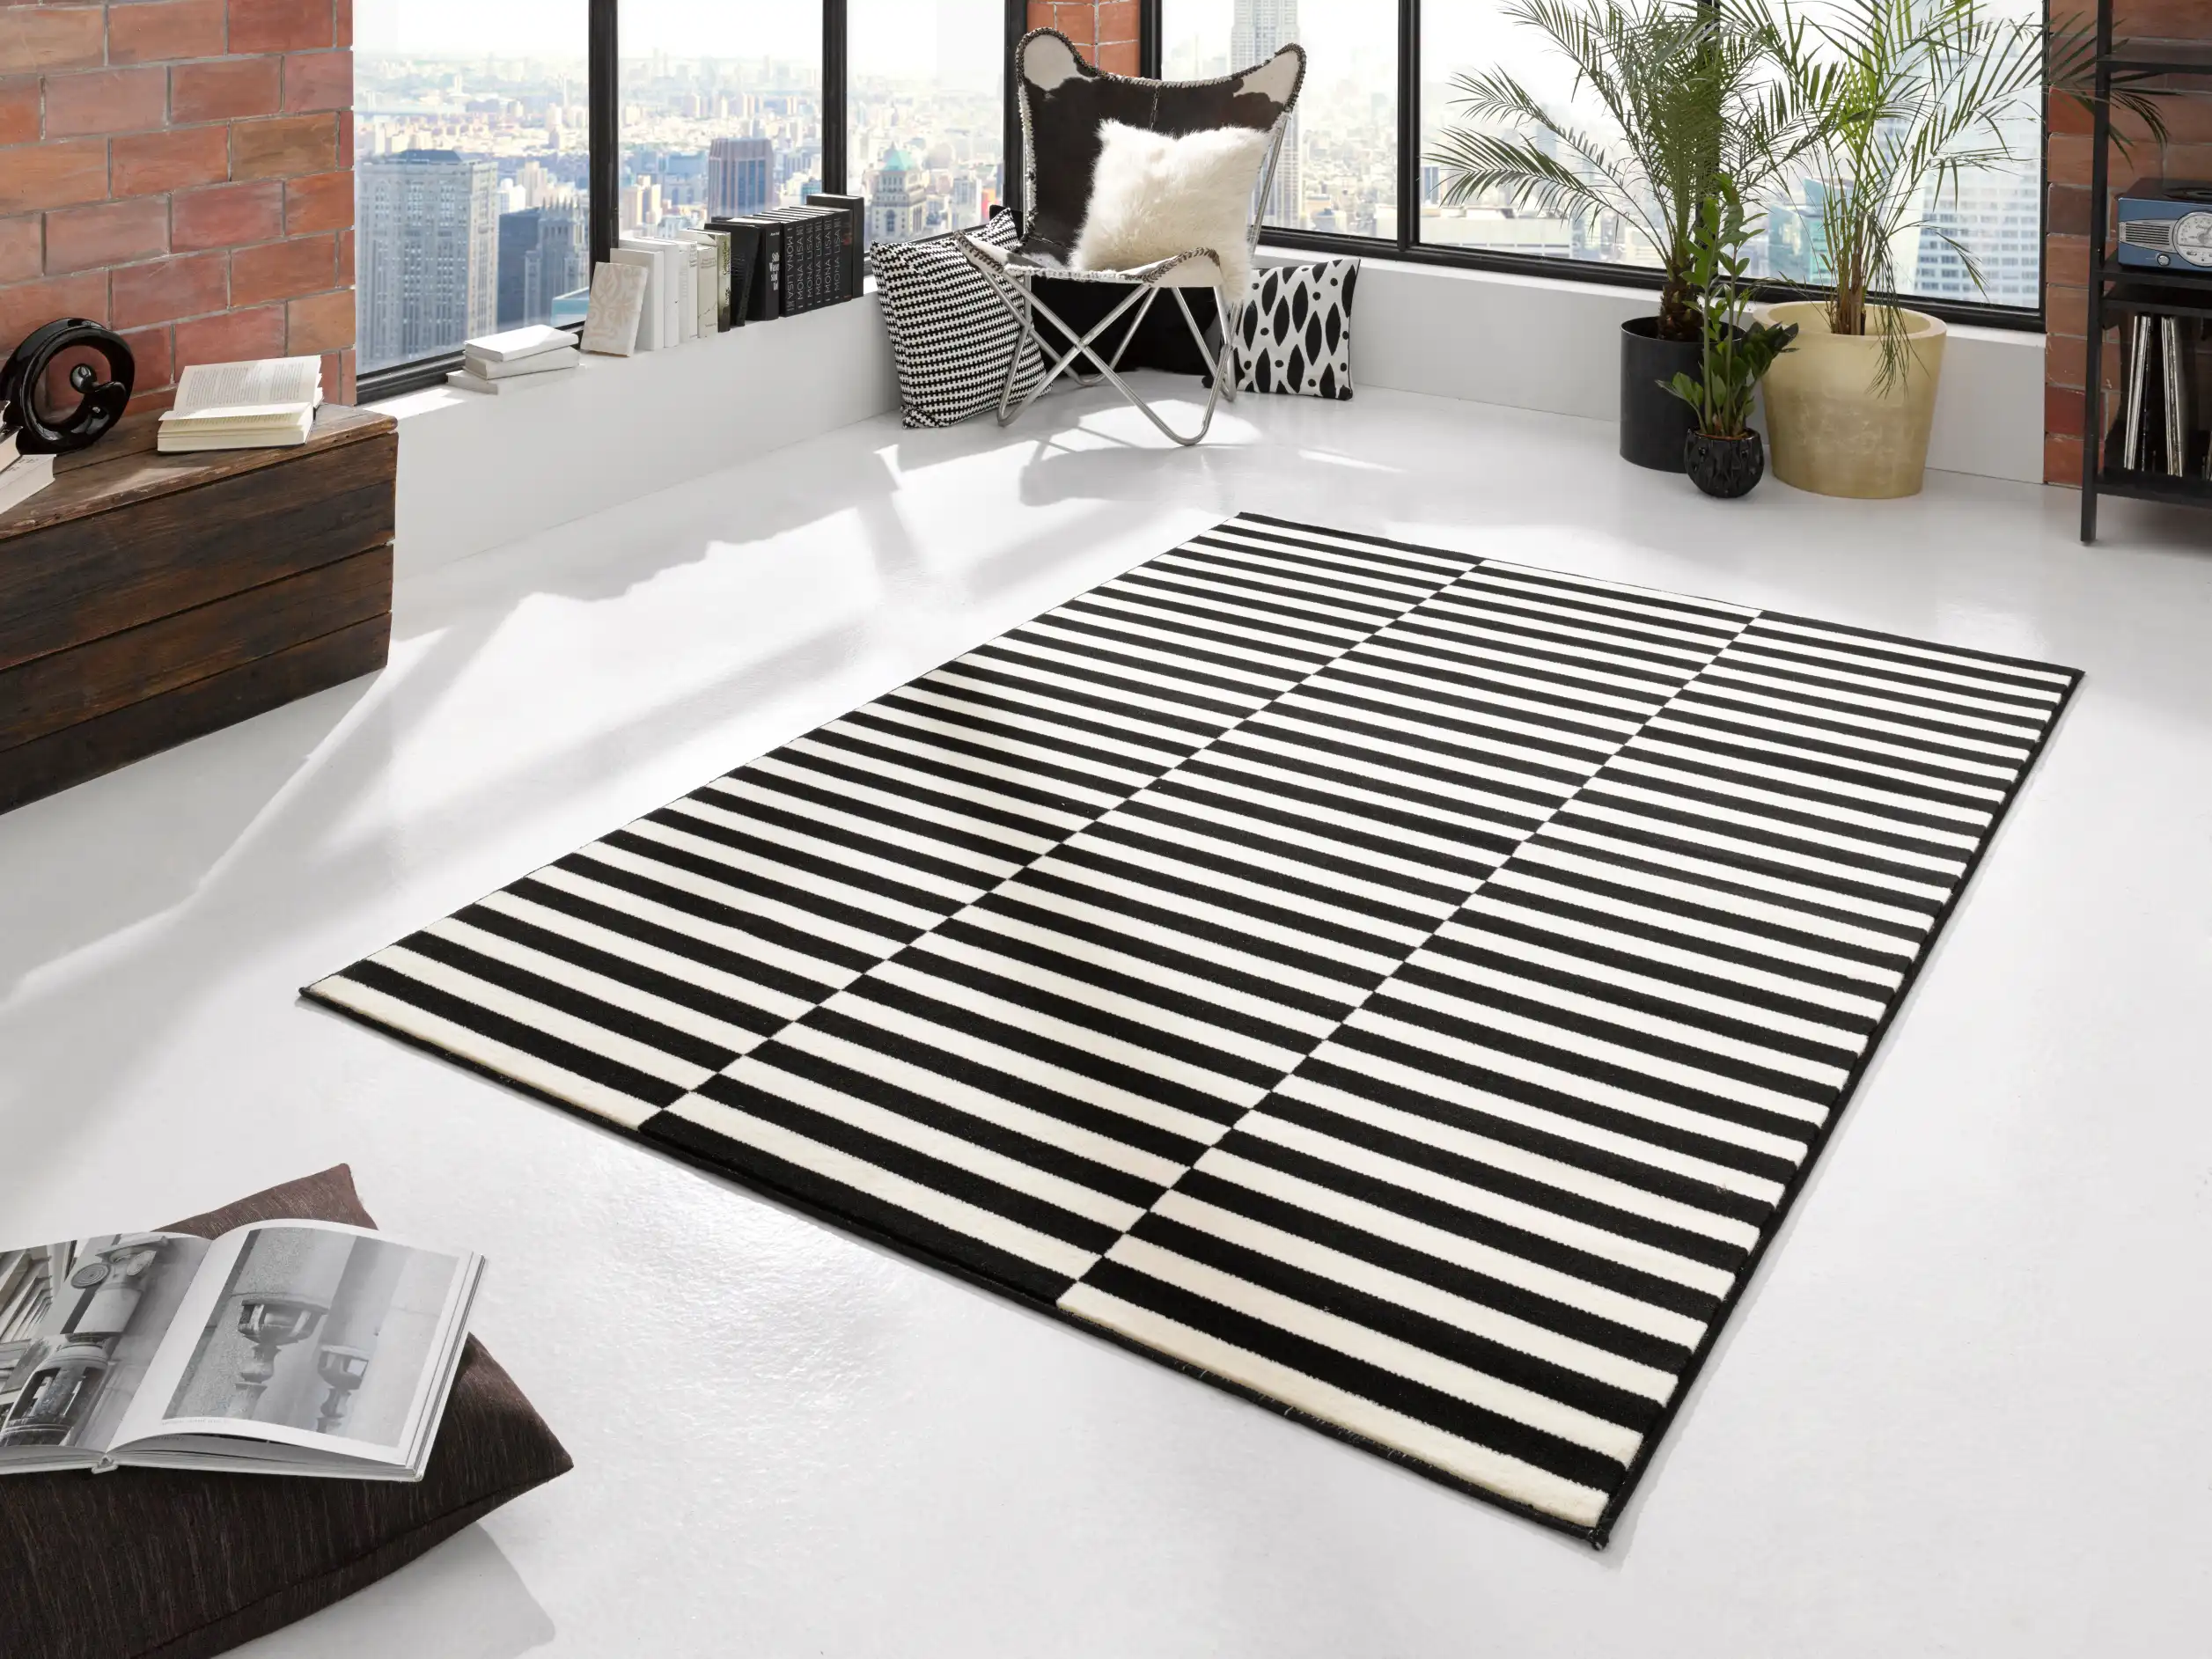 Black Rugs Uk – Small, Medium & Large With Free Delivery | Rugs Direct